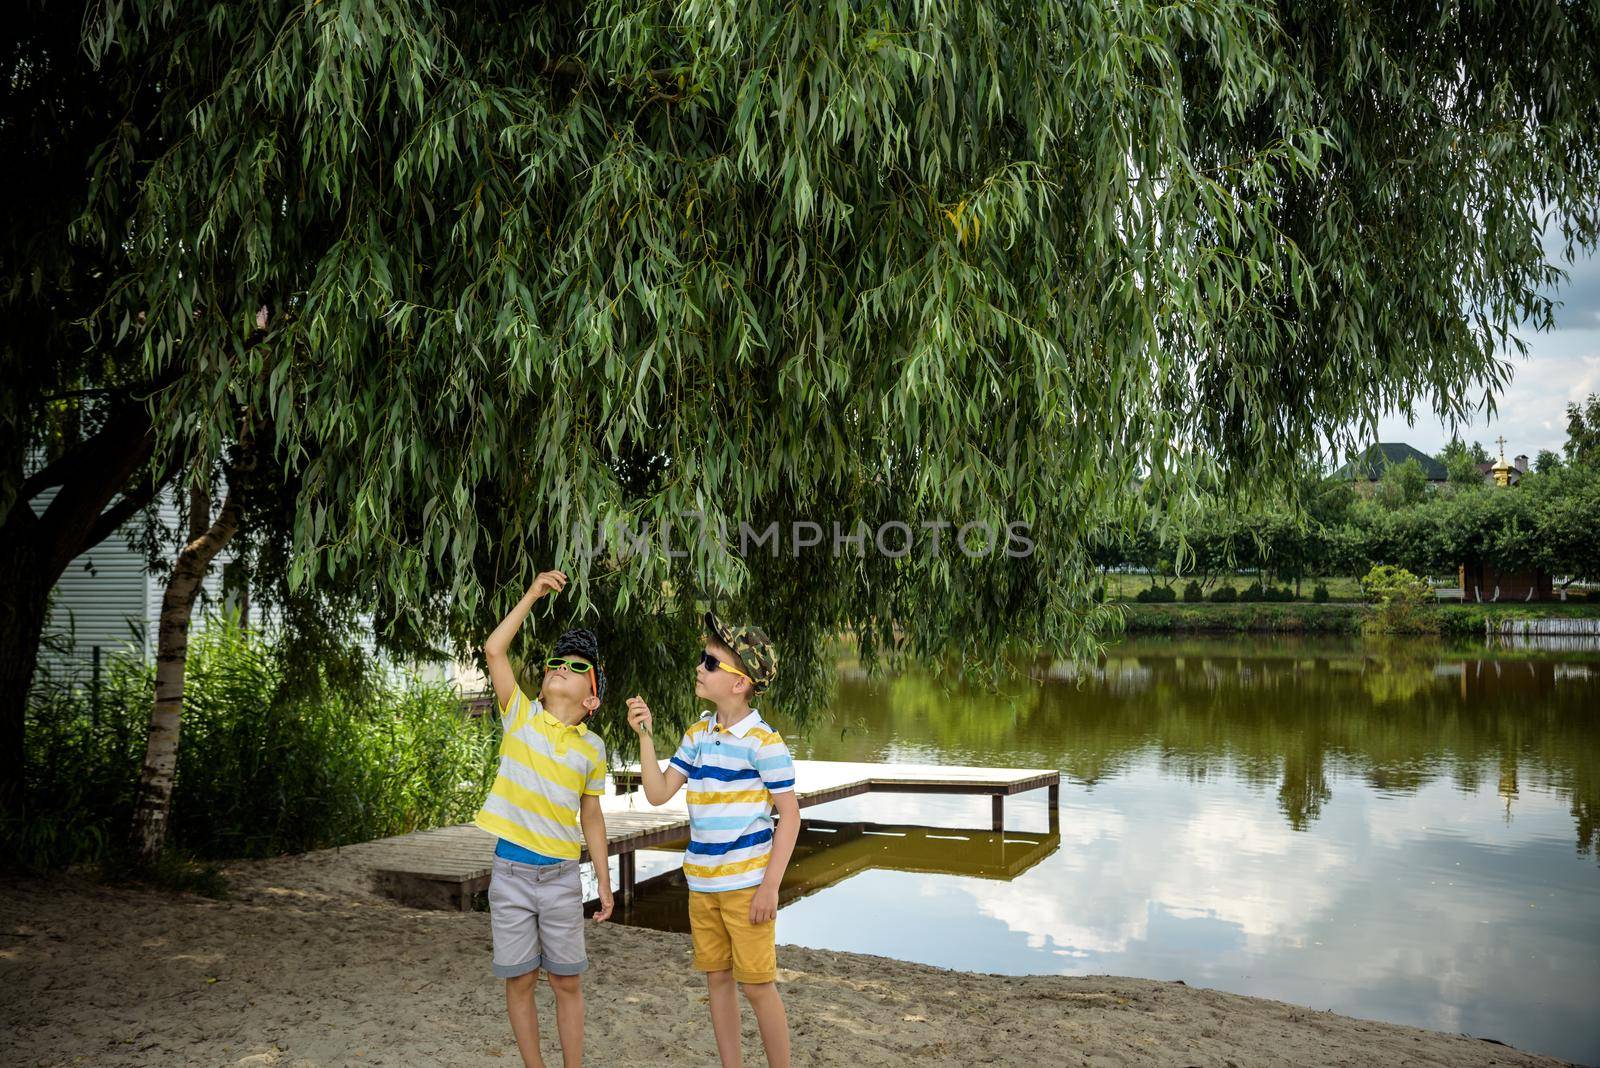 Siblings, brother, hugs. Two children, older boy and his younger brother standing on the shore of the lake near old tree. Summertime holiday concept leisure time on nature by Kobysh